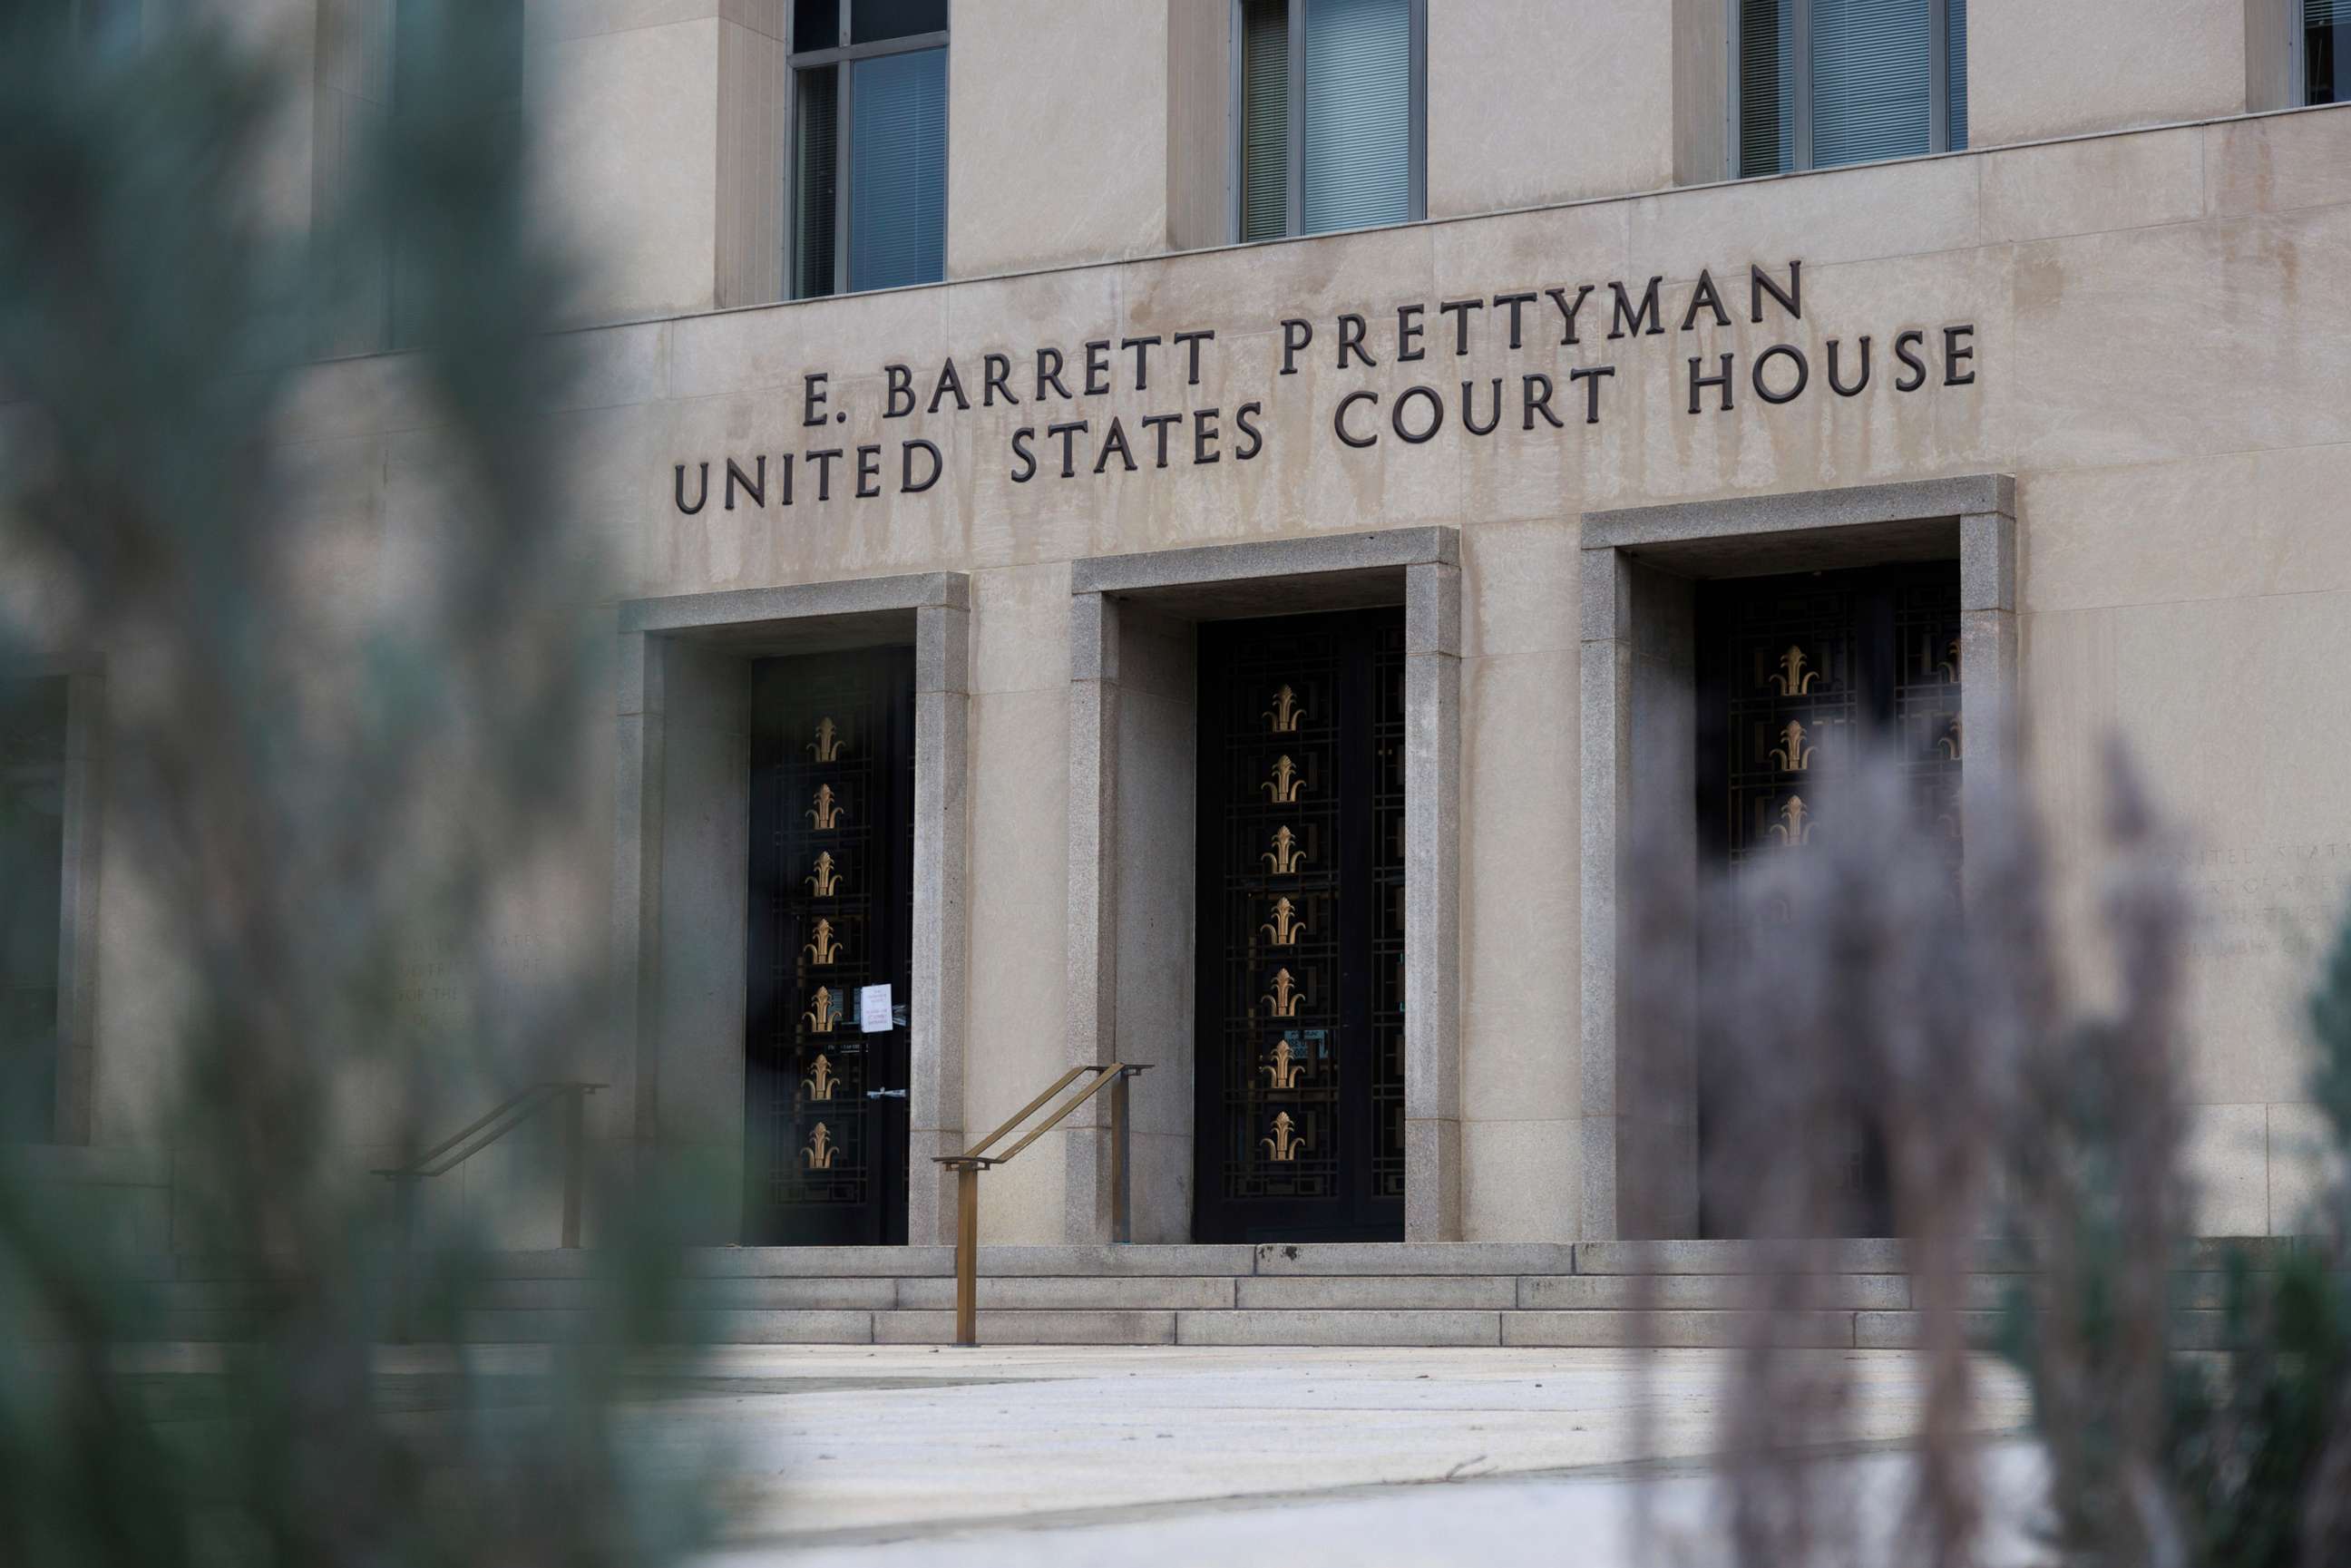 PHOTO: The E. Barrett Prettyman federal courthouse in Washington, D.C. is seen on Jan. 12, 2023 during the beginning of the trial for several Proud Boys members charged with seditious conspiracy for their roles in the Jan 6, 2021 Capitol attacks.